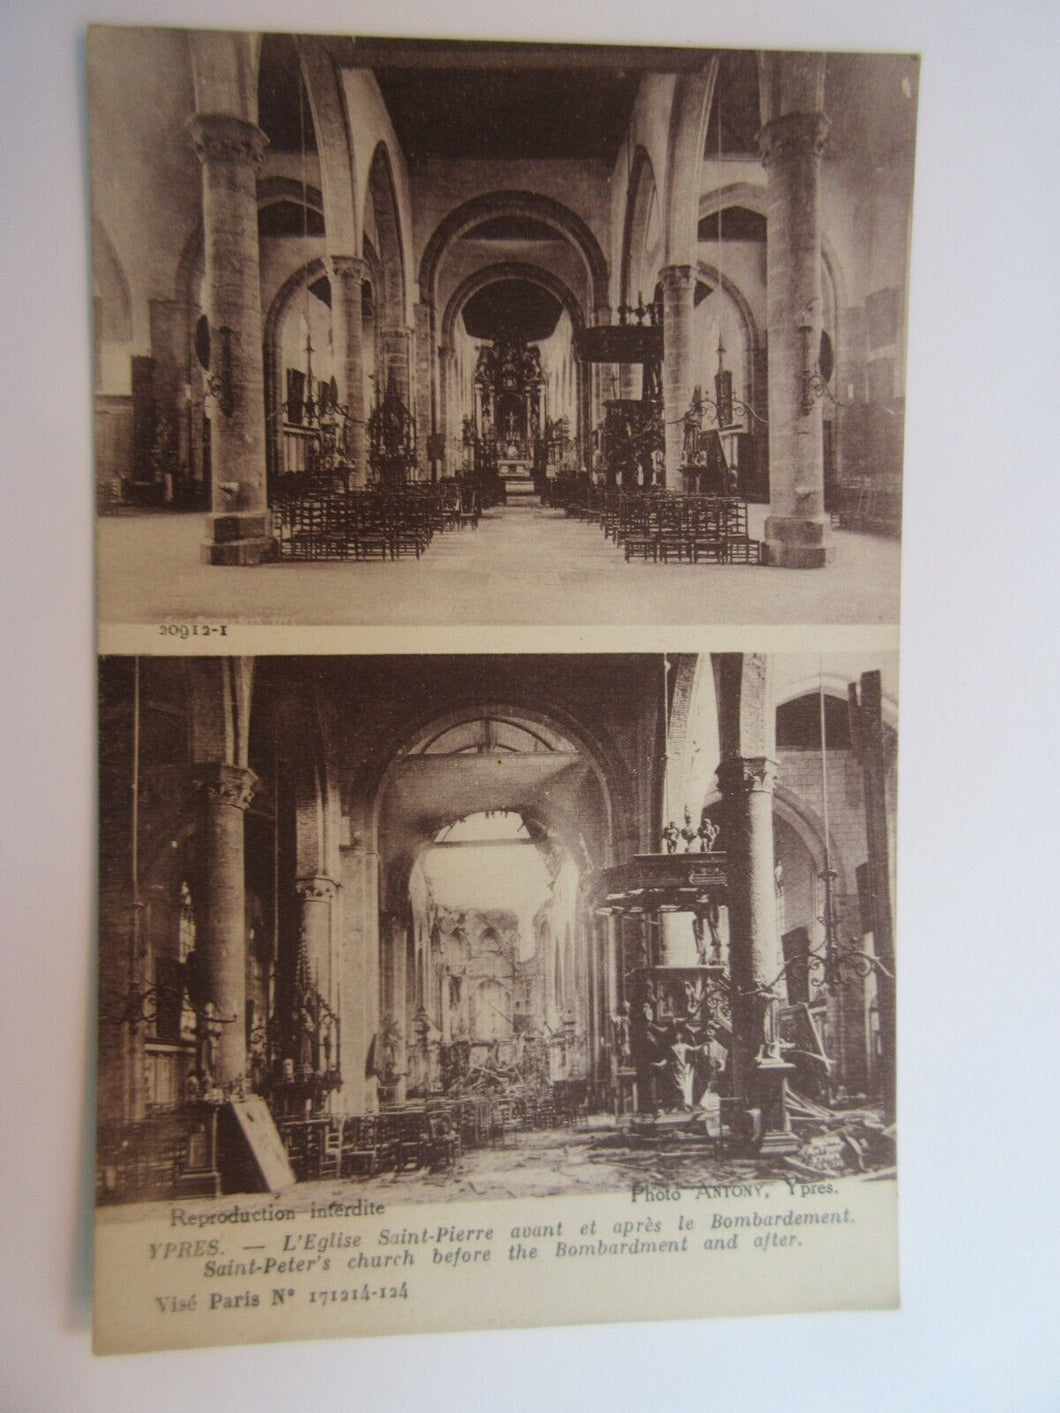 WWI POSTCARD YPRES SAINT PETERS CHURCH BEFORE & AFTER BOMBARDMENT A6